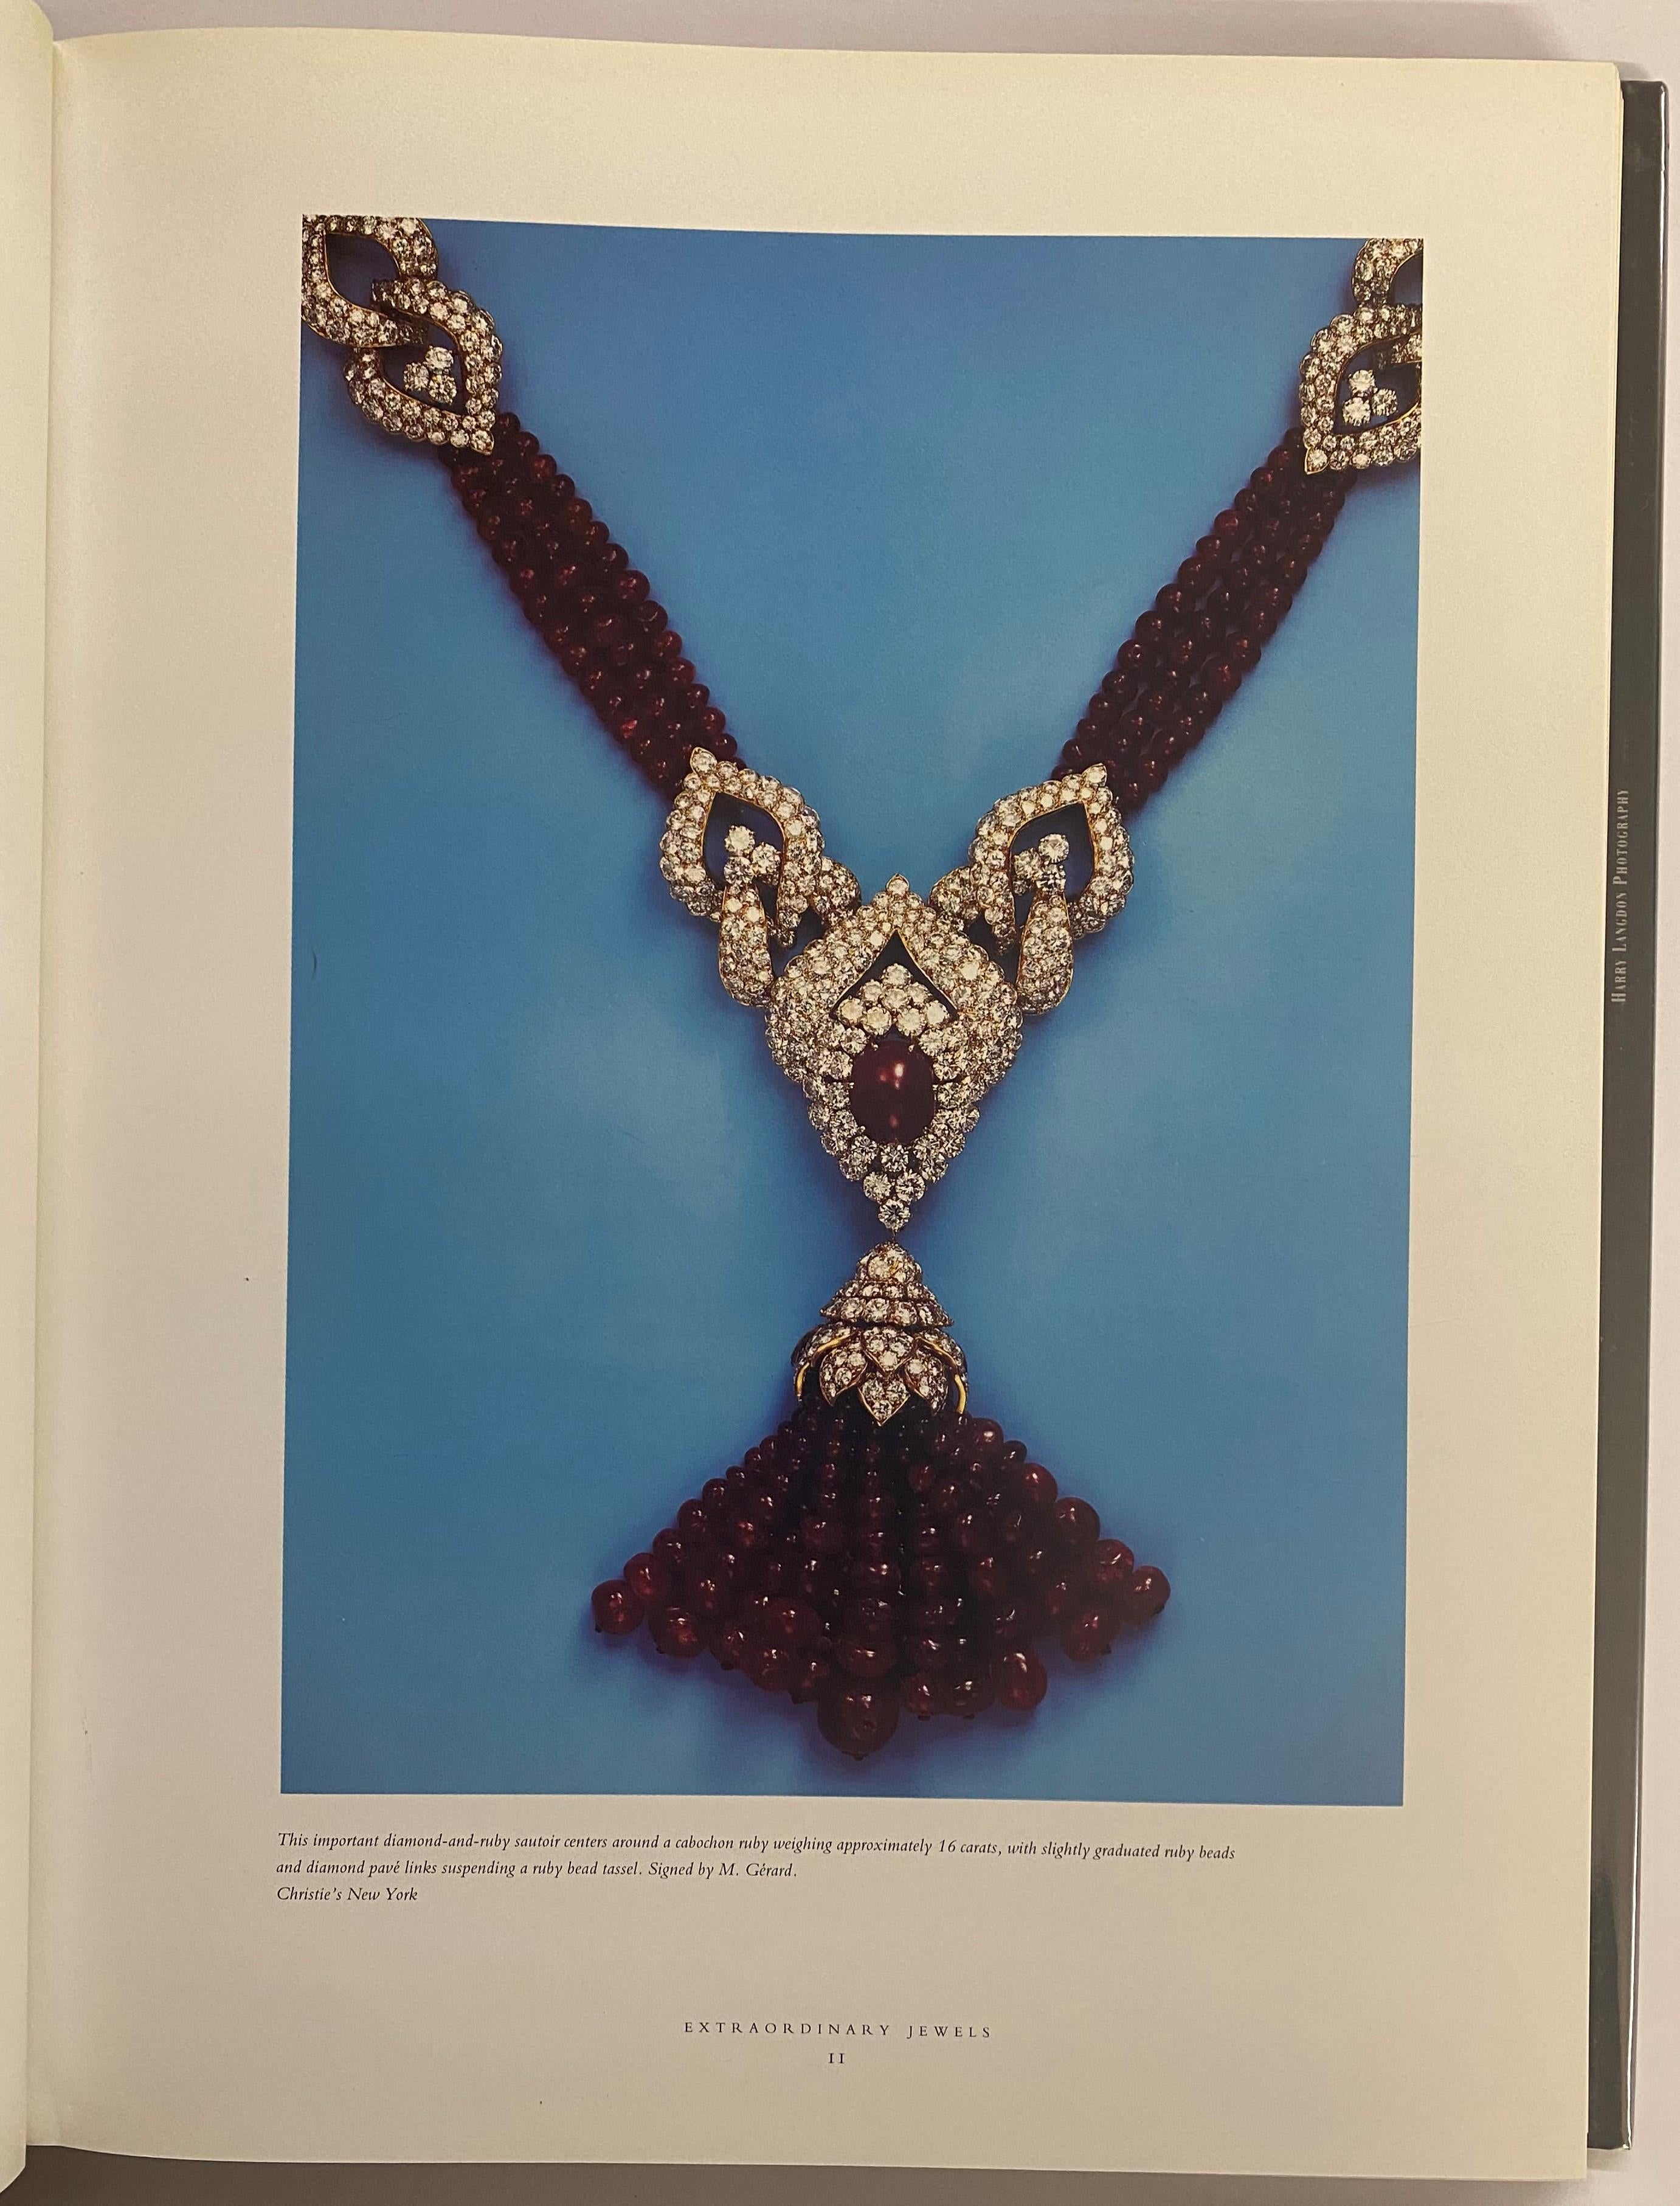 Filled with more than 150 colour photographs of the most beautiful jewels of our time, Extraordinary Jewels also tells the stories and often the scandals surrounding each jewel. We learn about the legend of the Hope diamond, of the diamond and ruby